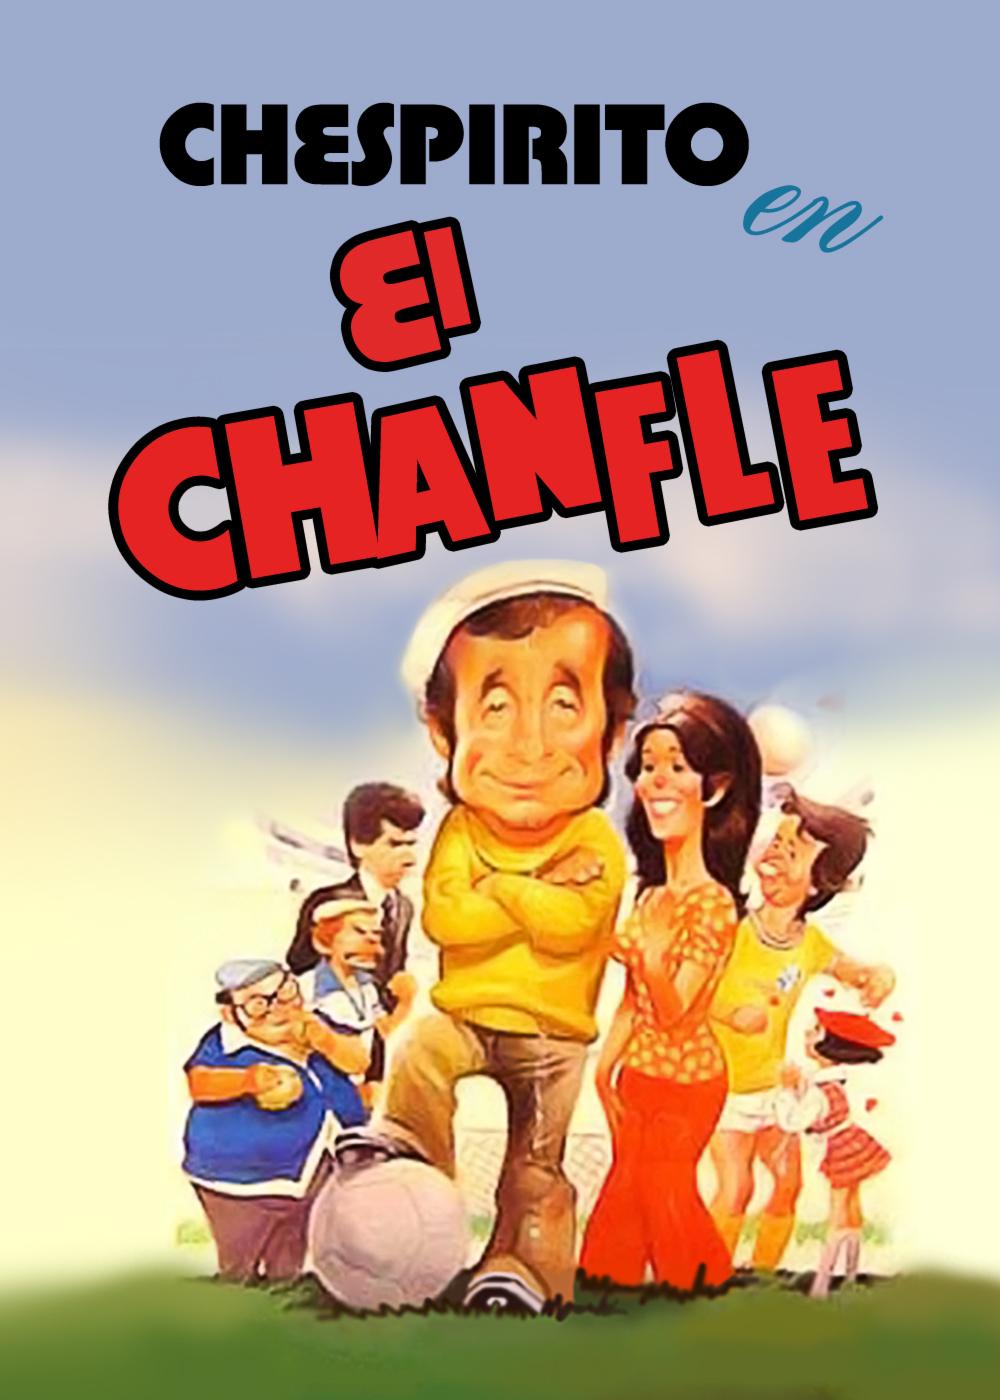 El chanfle (1979) with English Subtitles on DVD on DVD